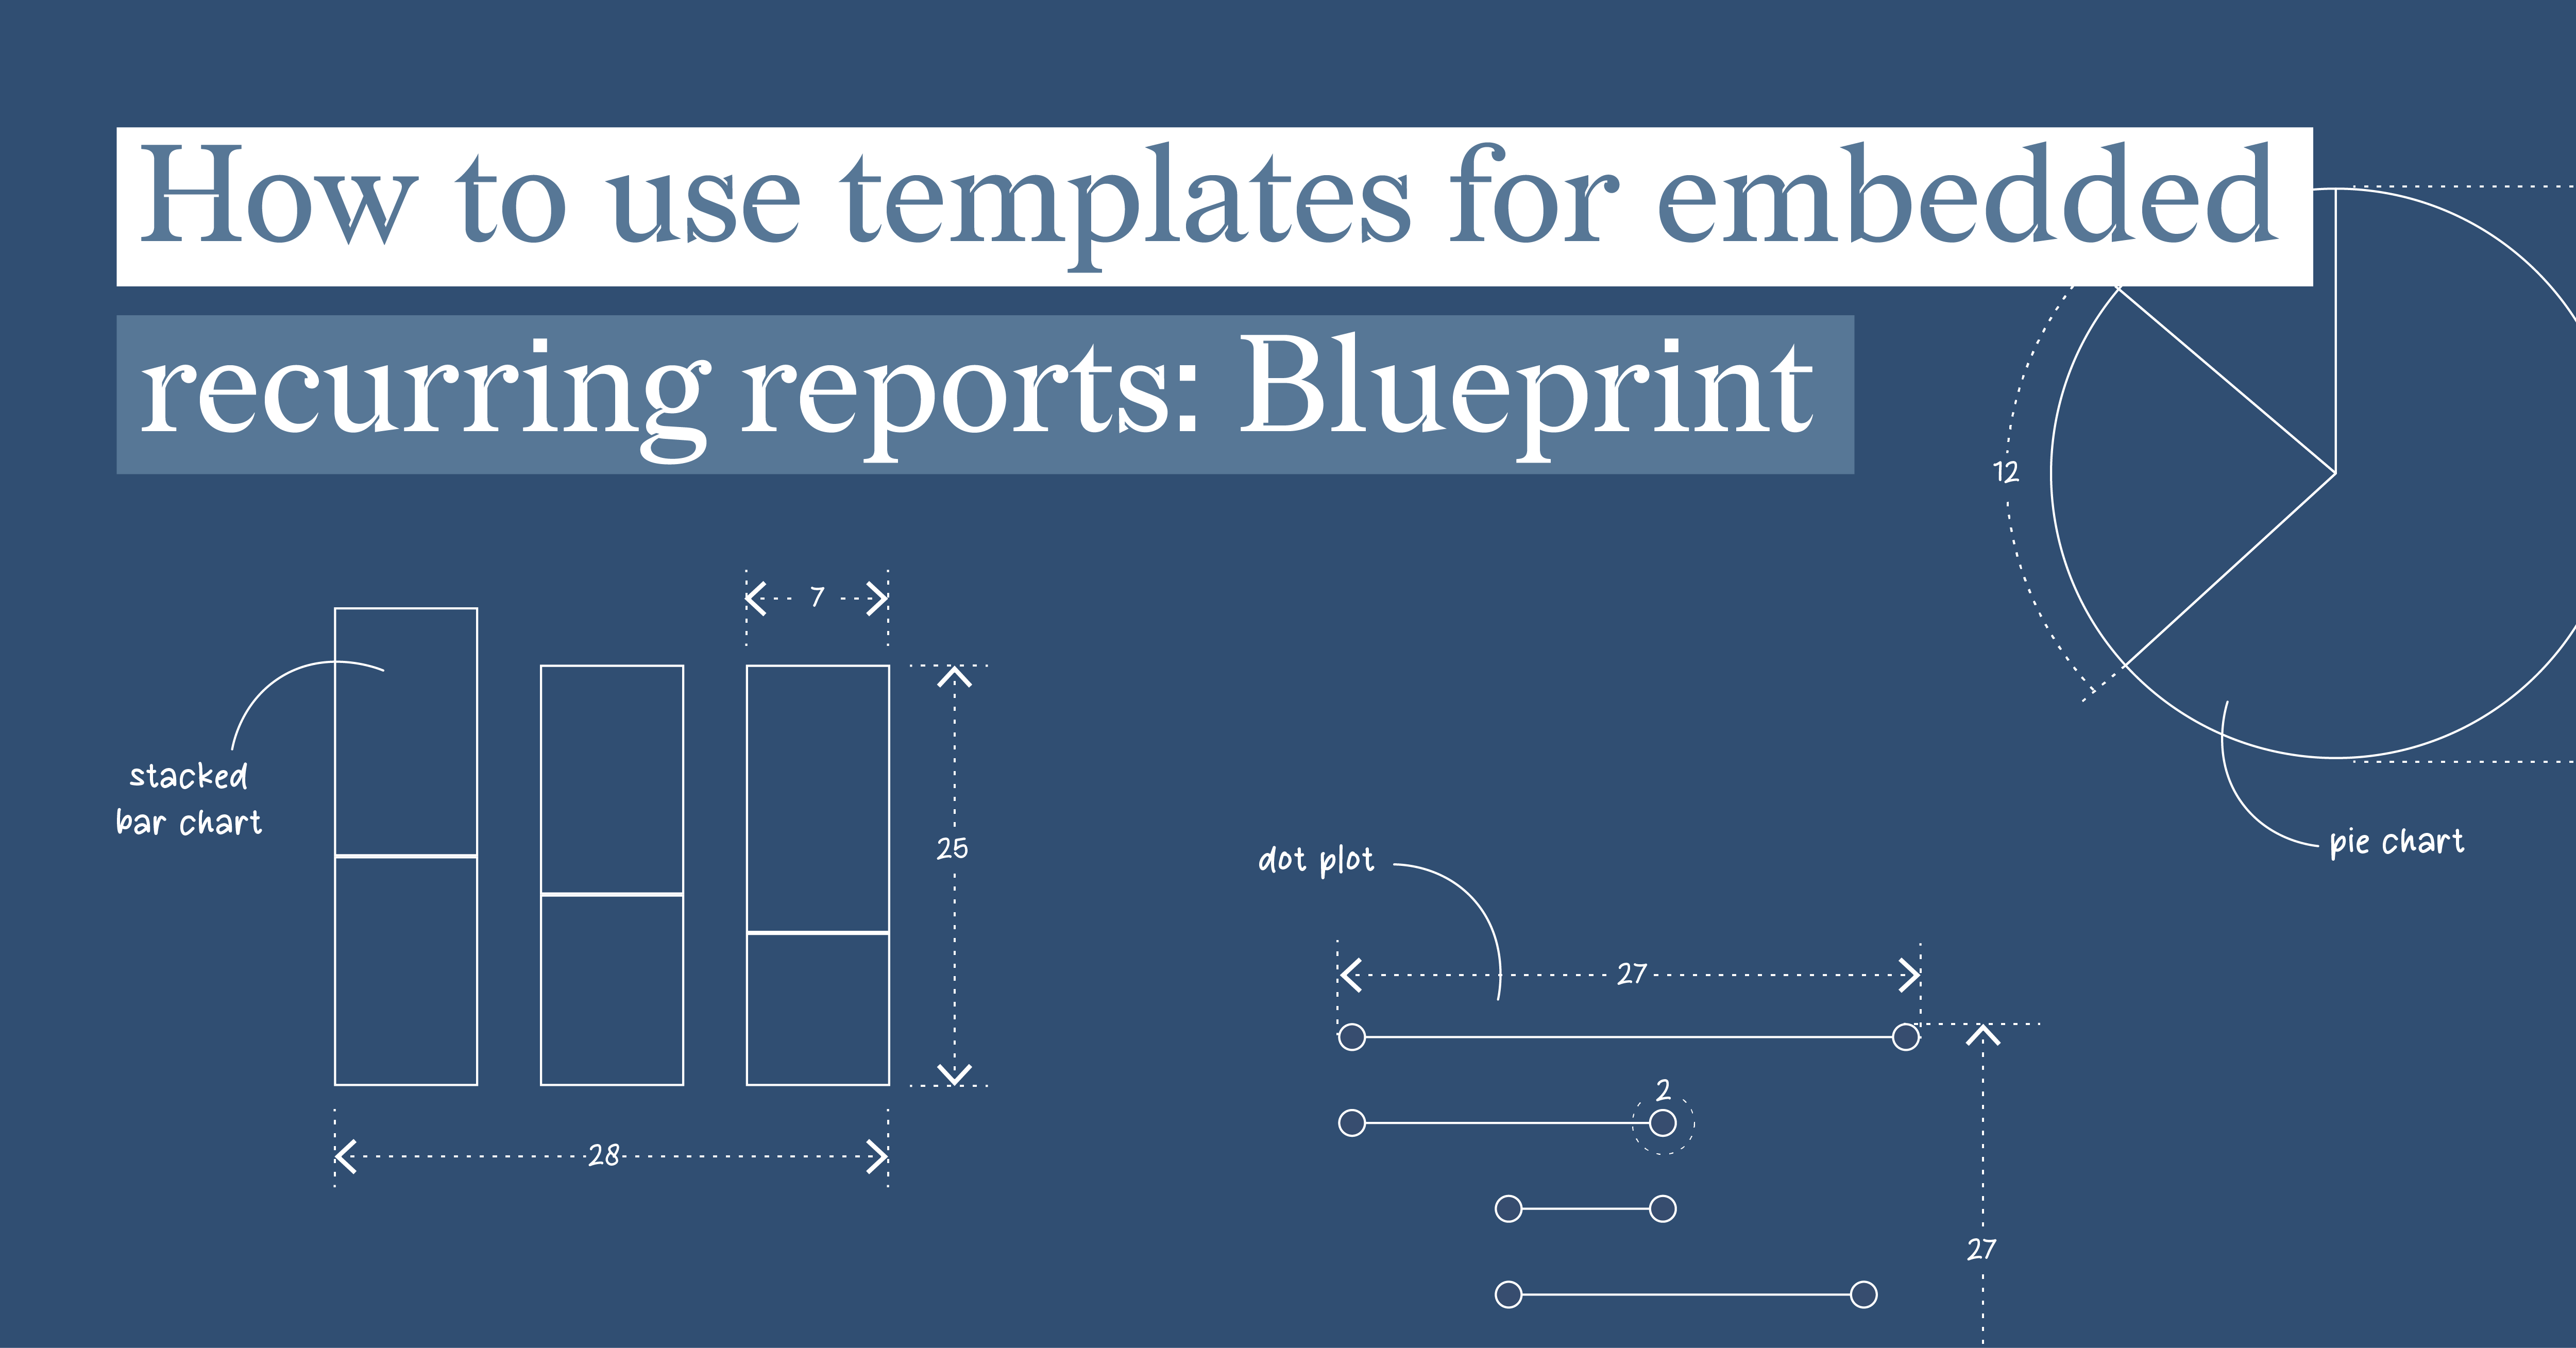 datylon-blog-how-to-use-templates-for-embedded-recurring-reports-blueprintfeatured-image